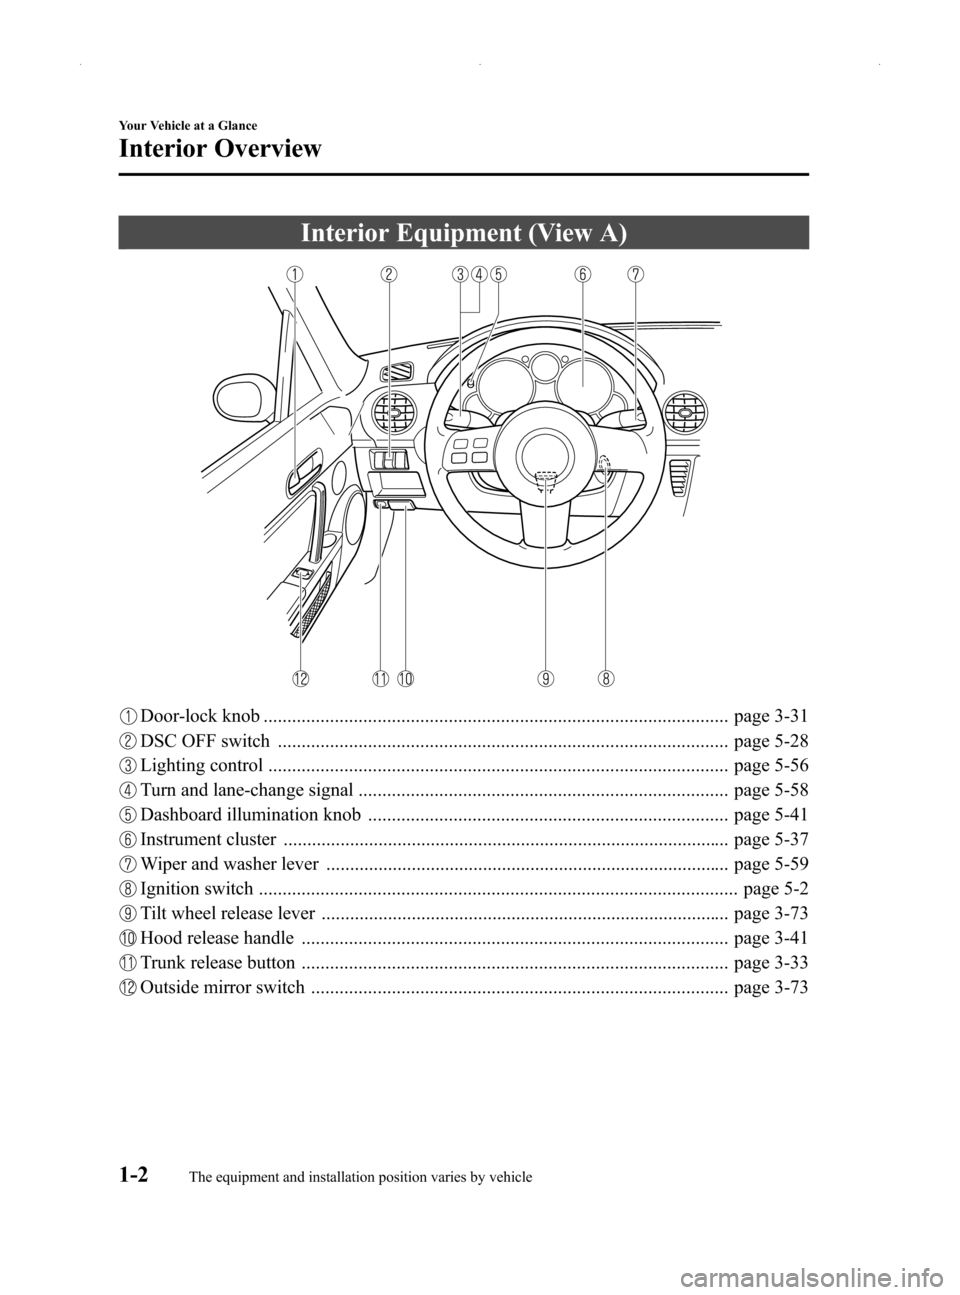 MAZDA MODEL MX-5 2014  Owners Manual (in English) Black plate (8,1)
Interior Equipment (View A)
Door-lock knob .................................................................................................. page 3-31
DSC OFF switch ...............